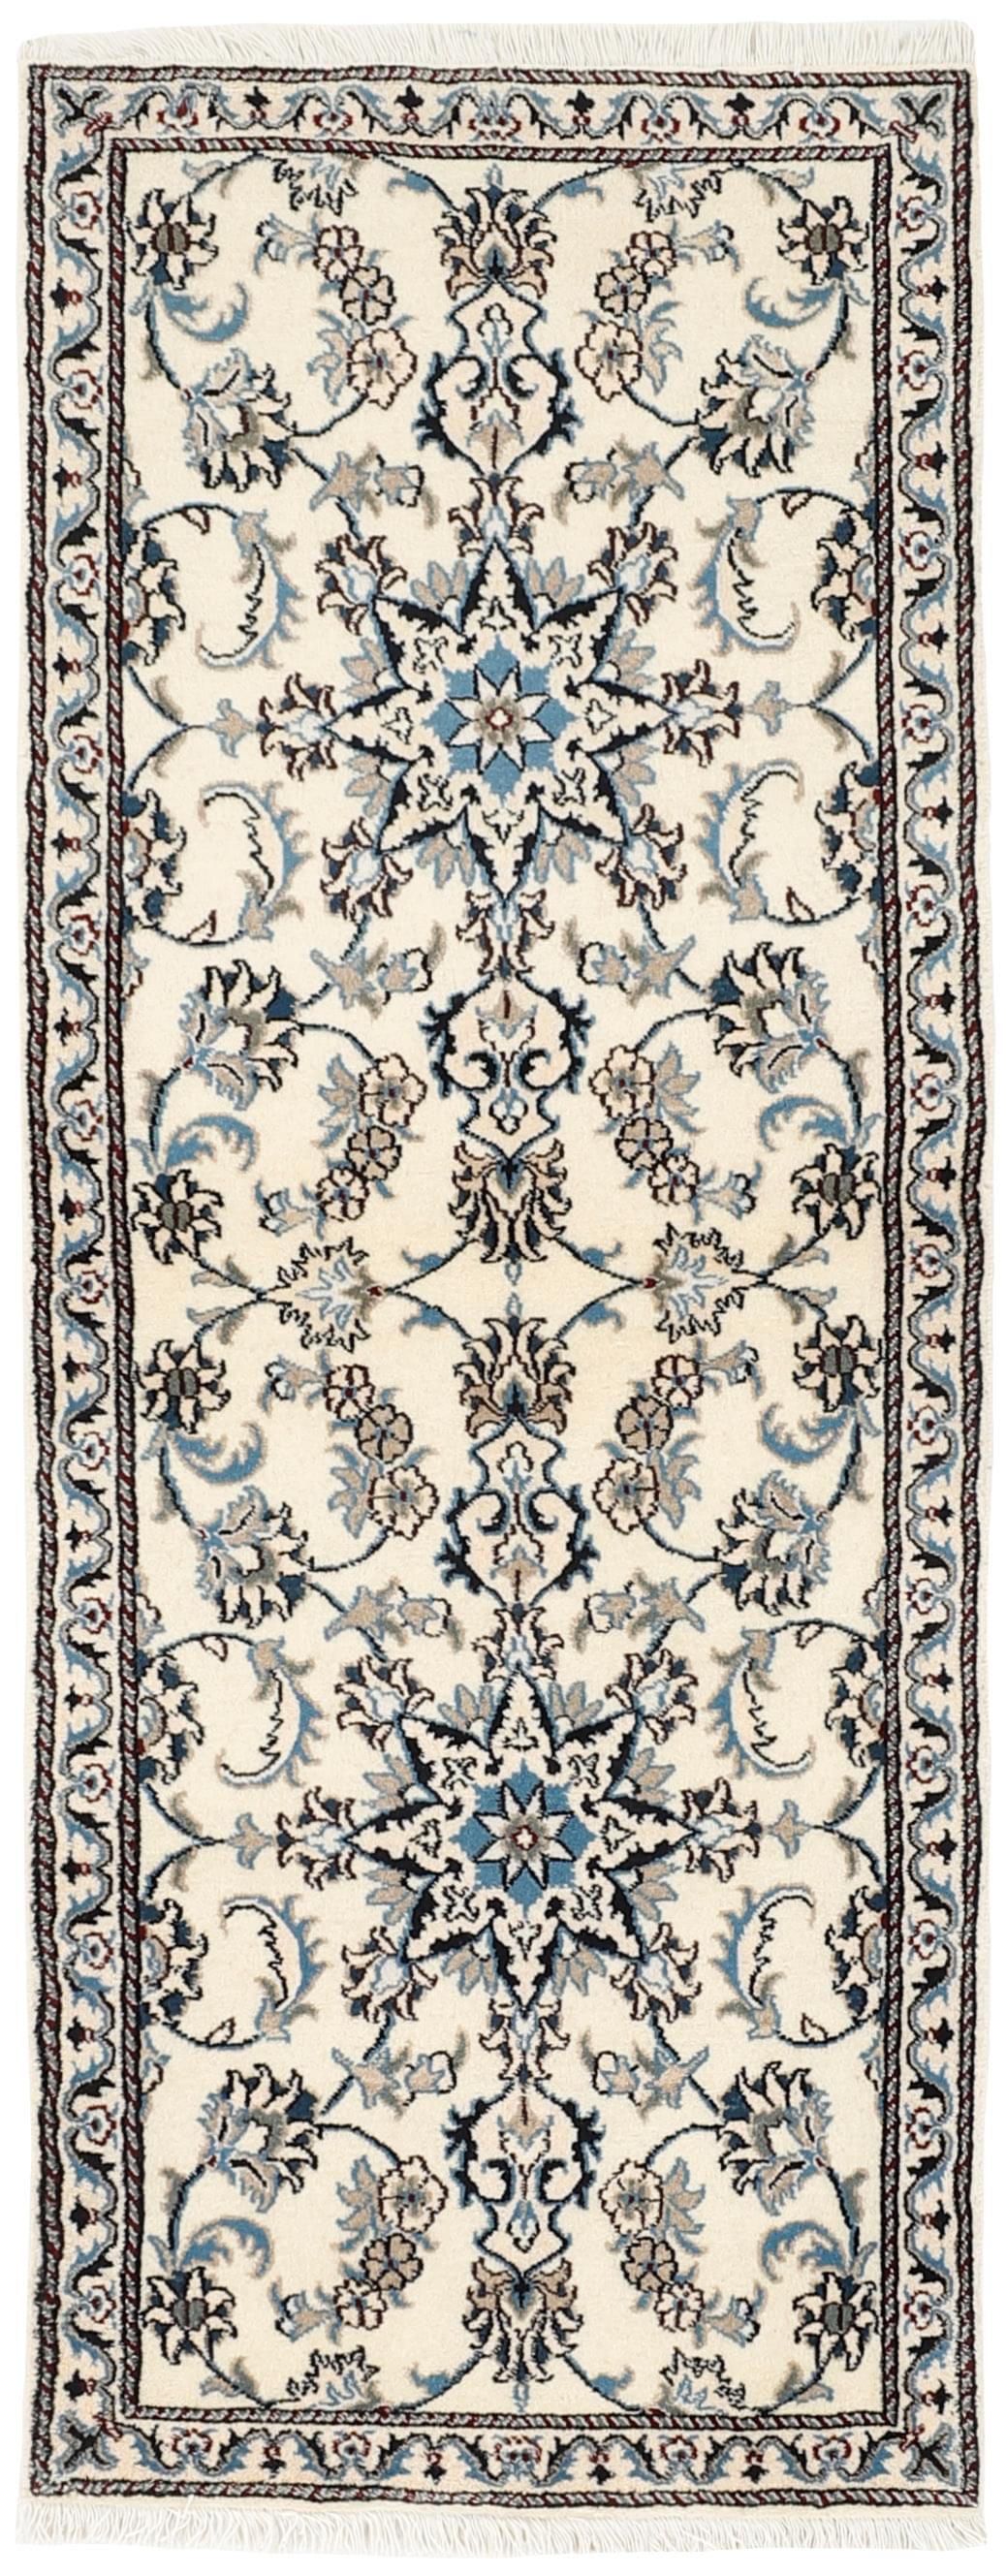 authentic persian runner with navy and cream floral design